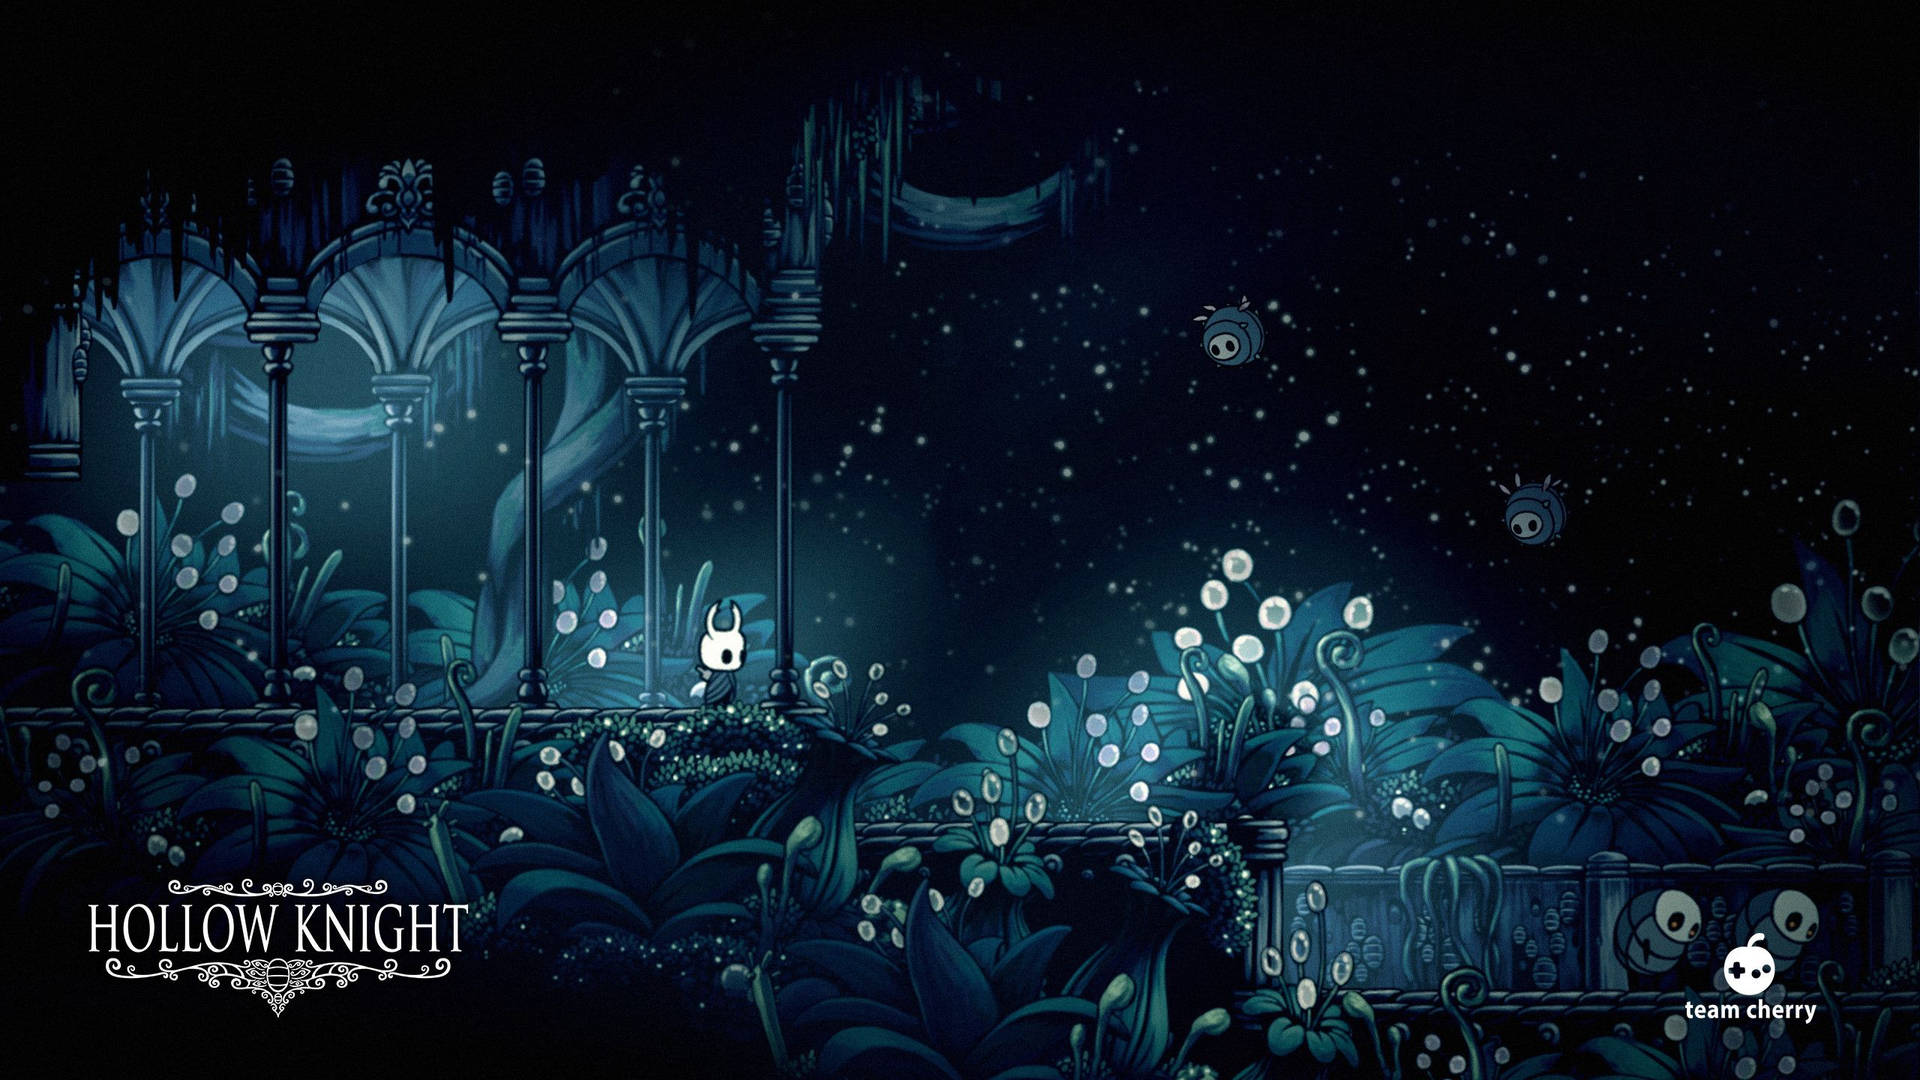 Set off on your own adventure with Hollow Knight Wallpaper